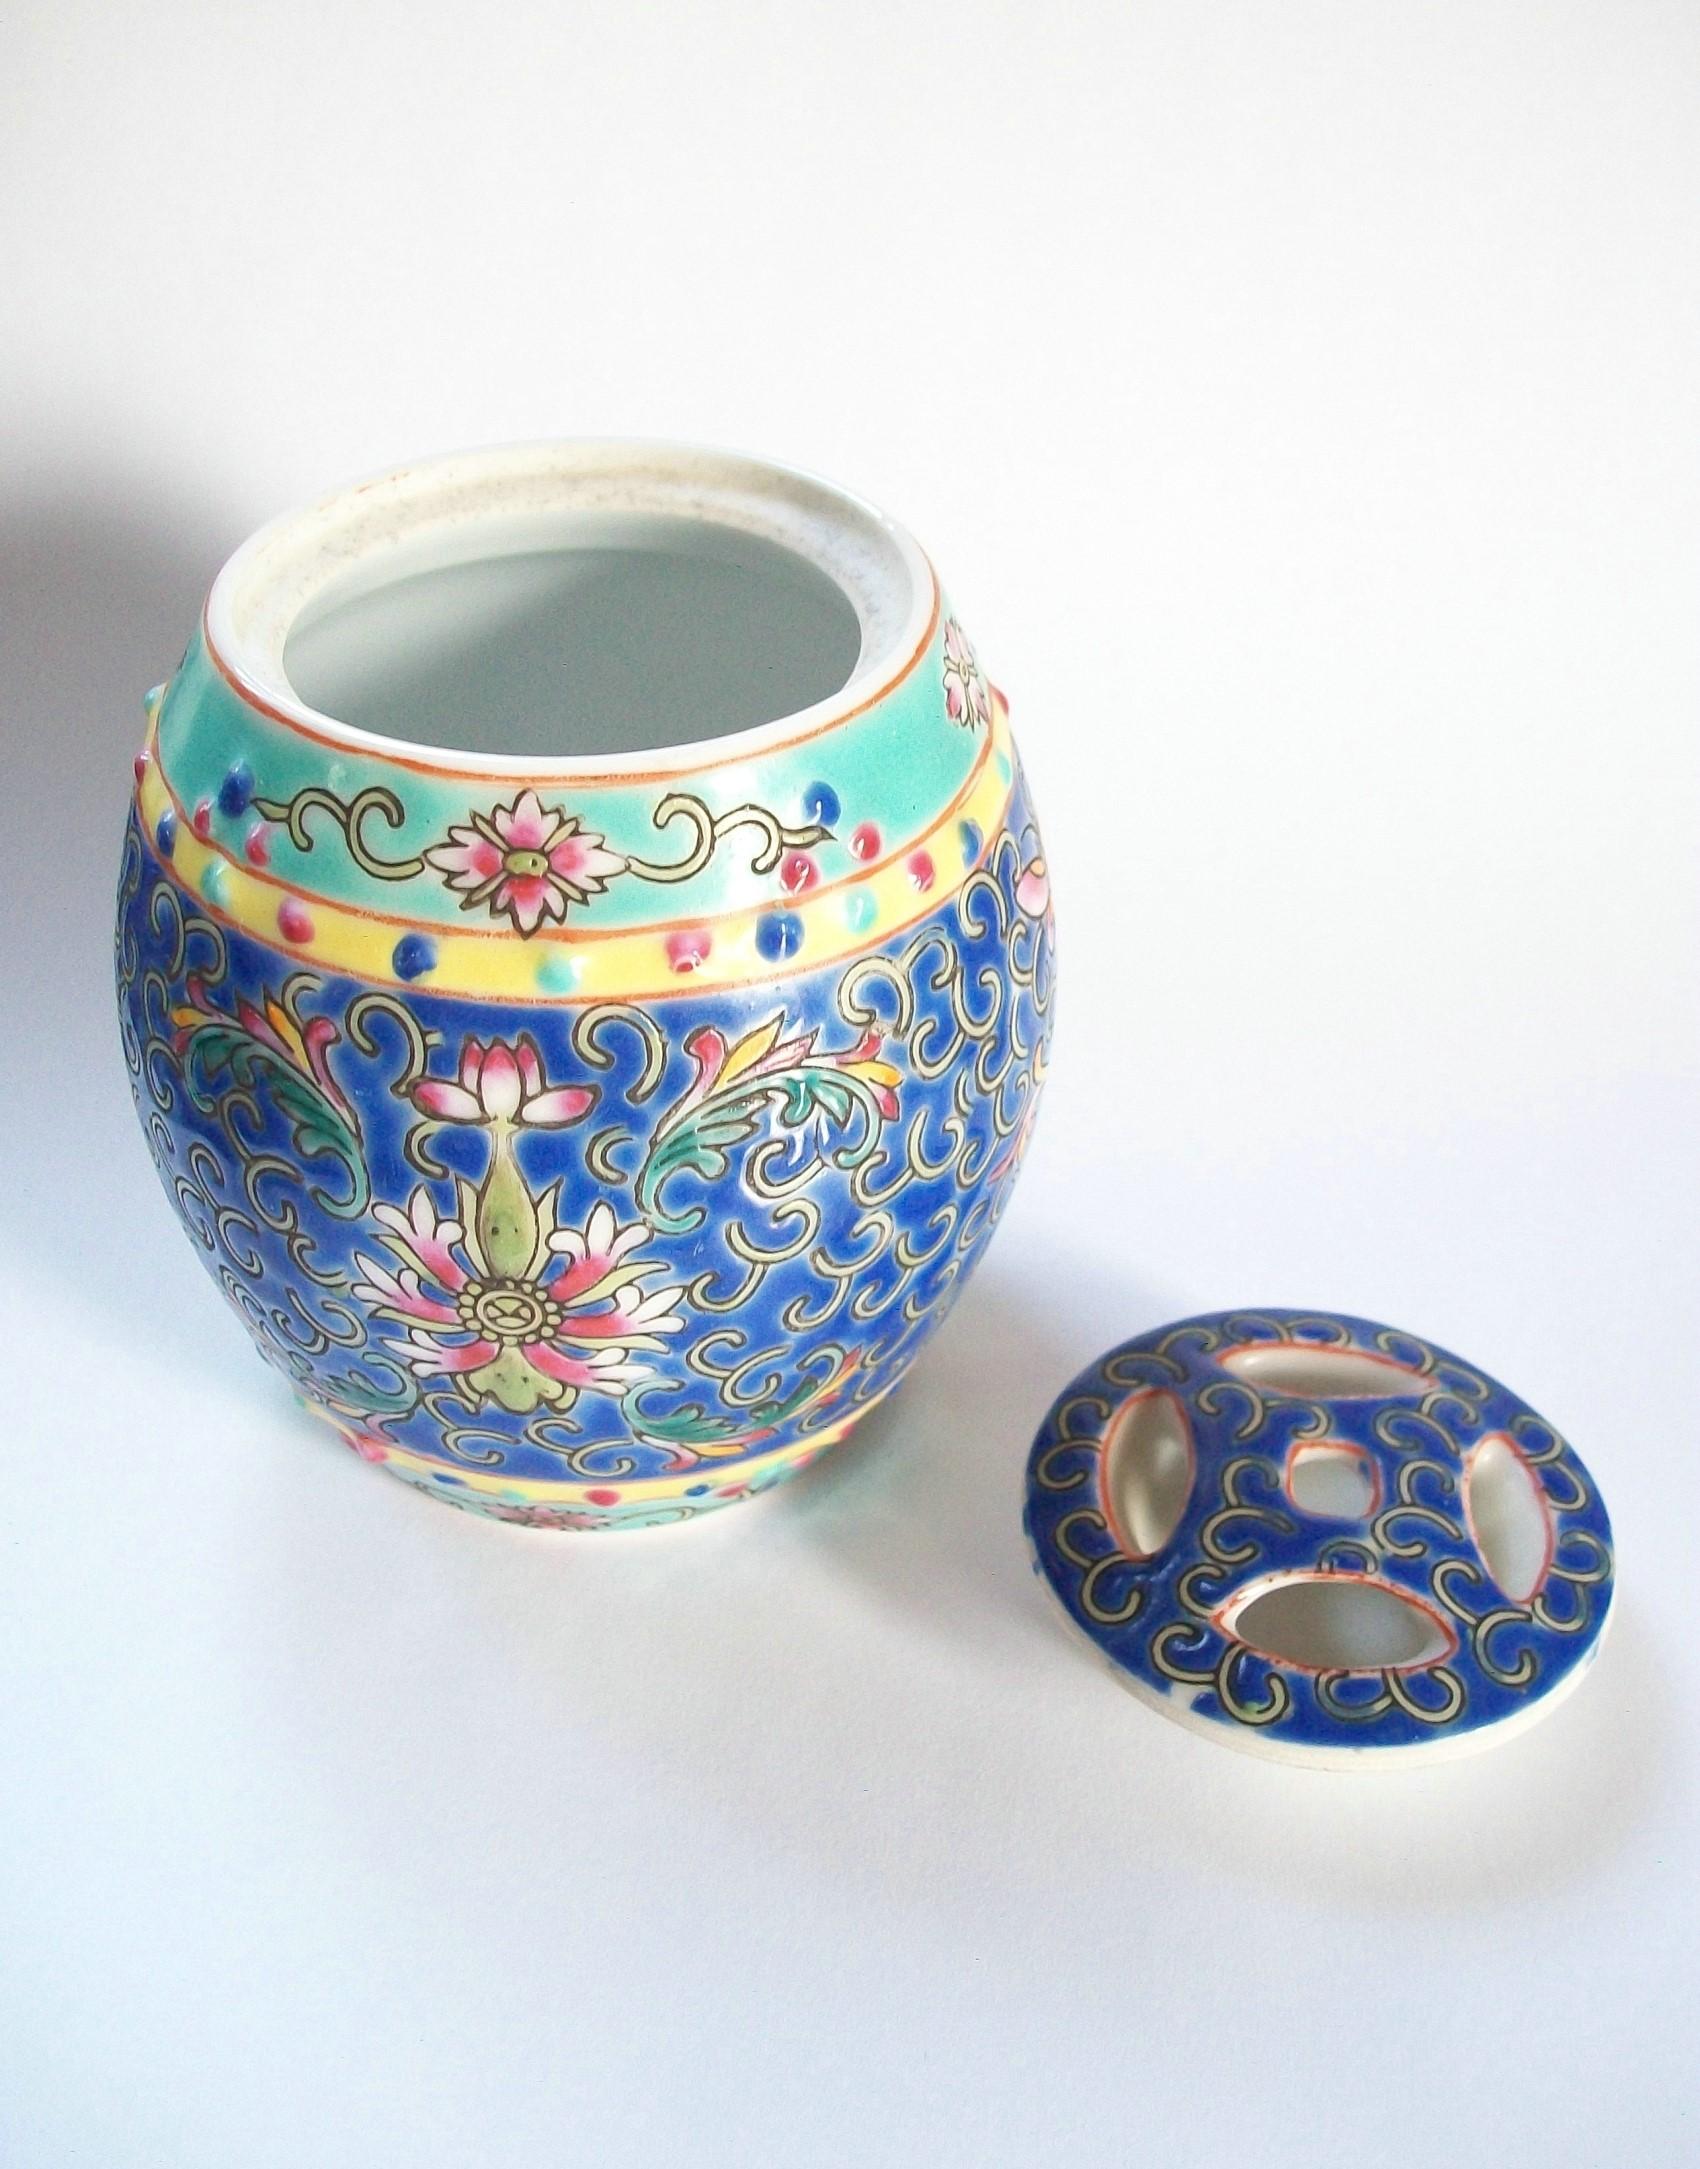 Ceramic Republic Period Barrel Shaped Porcelain Jar & Lid - China - Early 20th Century For Sale